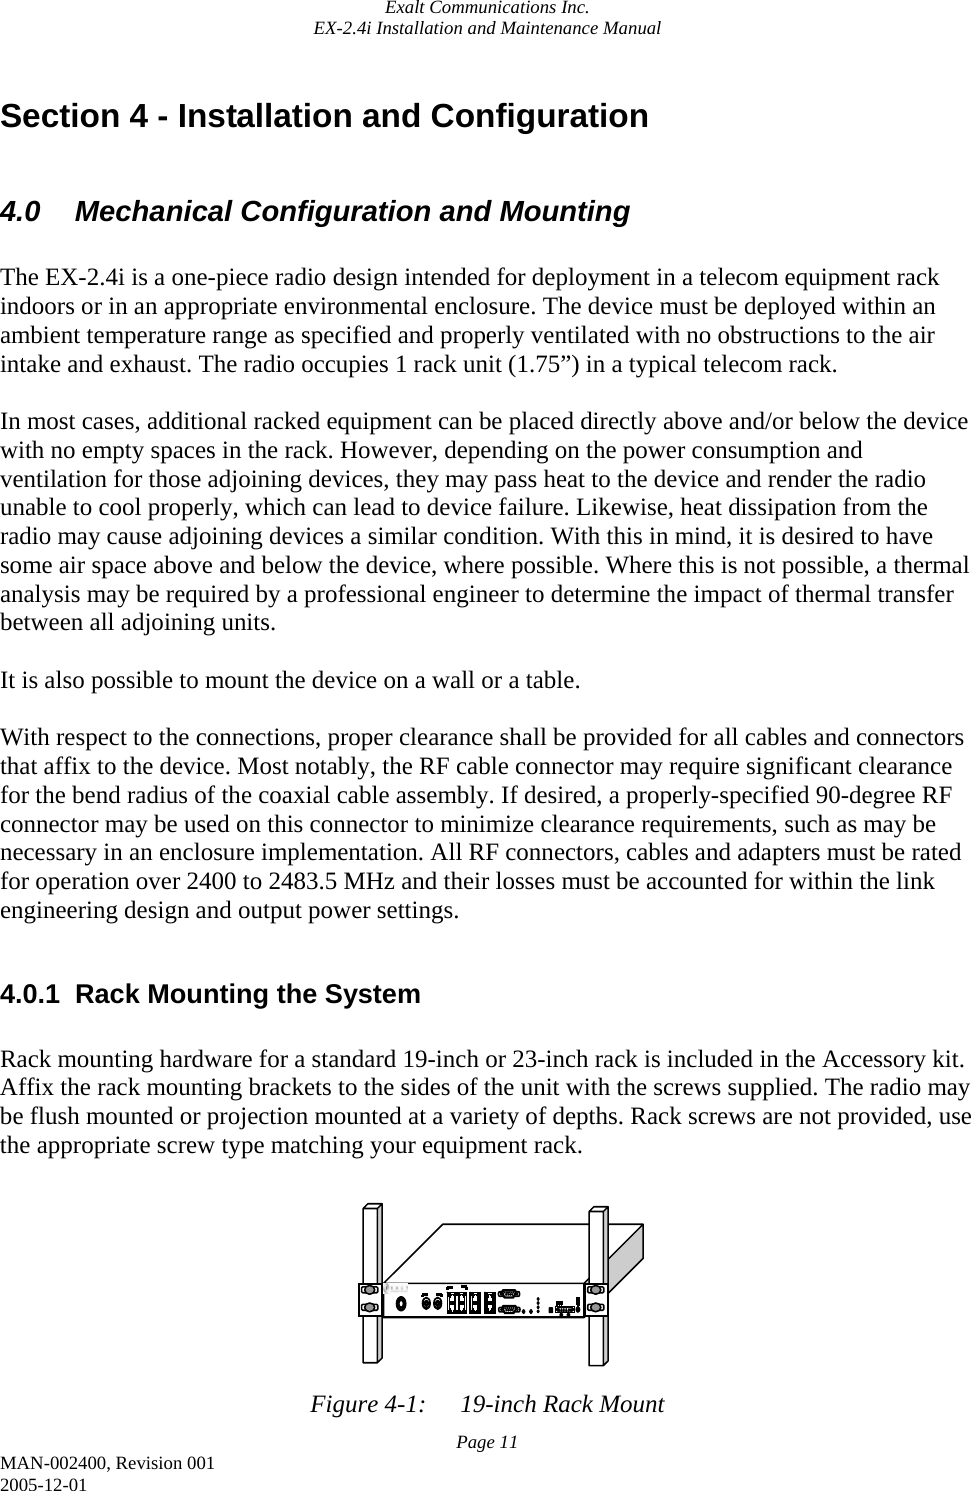 Exalt Communications Inc. EX-2.4i Installation and Maintenance Manual Page 11 MAN-002400, Revision 001 2005-12-01 Section 4 - Installation and Configuration  4.0  Mechanical Configuration and Mounting  The EX-2.4i is a one-piece radio design intended for deployment in a telecom equipment rack indoors or in an appropriate environmental enclosure. The device must be deployed within an ambient temperature range as specified and properly ventilated with no obstructions to the air intake and exhaust. The radio occupies 1 rack unit (1.75”) in a typical telecom rack.   In most cases, additional racked equipment can be placed directly above and/or below the device with no empty spaces in the rack. However, depending on the power consumption and ventilation for those adjoining devices, they may pass heat to the device and render the radio unable to cool properly, which can lead to device failure. Likewise, heat dissipation from the radio may cause adjoining devices a similar condition. With this in mind, it is desired to have some air space above and below the device, where possible. Where this is not possible, a thermal analysis may be required by a professional engineer to determine the impact of thermal transfer between all adjoining units.  It is also possible to mount the device on a wall or a table.  With respect to the connections, proper clearance shall be provided for all cables and connectors that affix to the device. Most notably, the RF cable connector may require significant clearance for the bend radius of the coaxial cable assembly. If desired, a properly-specified 90-degree RF connector may be used on this connector to minimize clearance requirements, such as may be necessary in an enclosure implementation. All RF connectors, cables and adapters must be rated for operation over 2400 to 2483.5 MHz and their losses must be accounted for within the link engineering design and output power settings.  4.0.1  Rack Mounting the System  Rack mounting hardware for a standard 19-inch or 23-inch rack is included in the Accessory kit. Affix the rack mounting brackets to the sides of the unit with the screws supplied. The radio may be flush mounted or projection mounted at a variety of depths. Rack screws are not provided, use the appropriate screw type matching your equipment rack.         Figure 4-1:  19-inch Rack Mount 